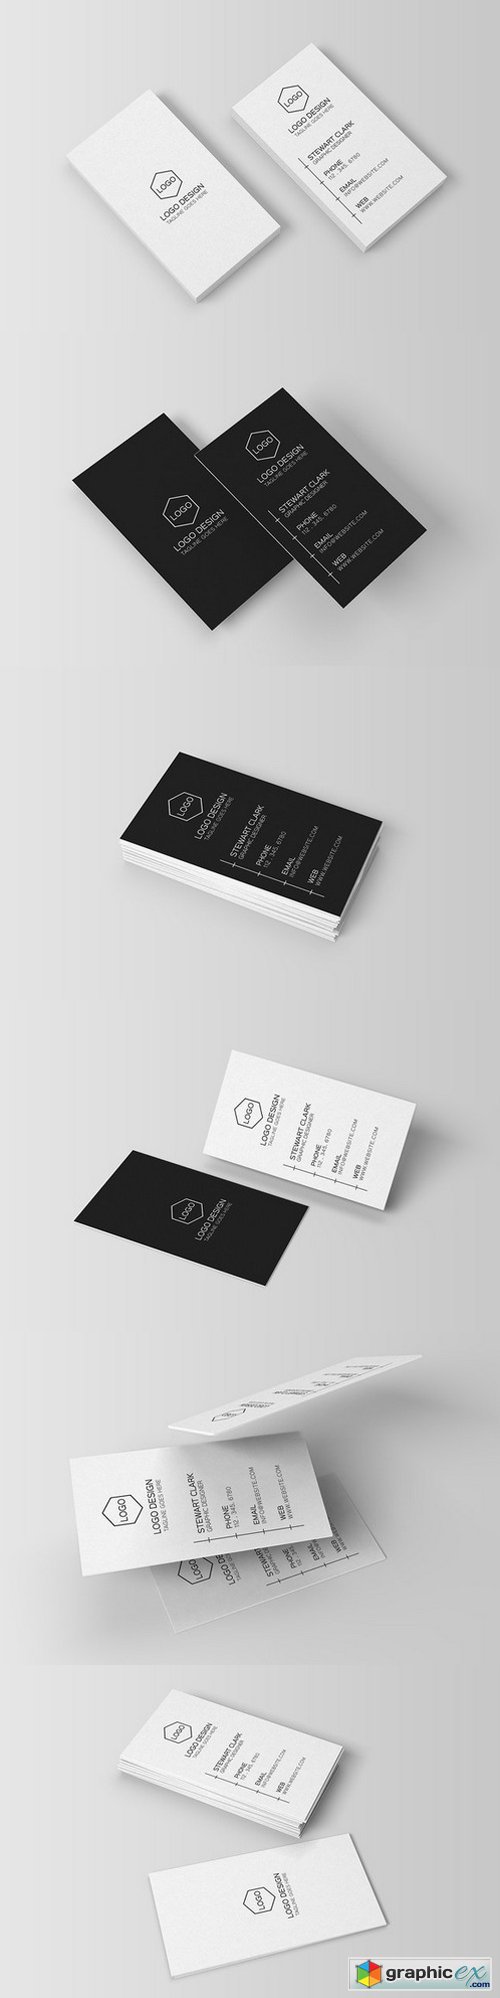 Clean Minimal Business Card Template 393498